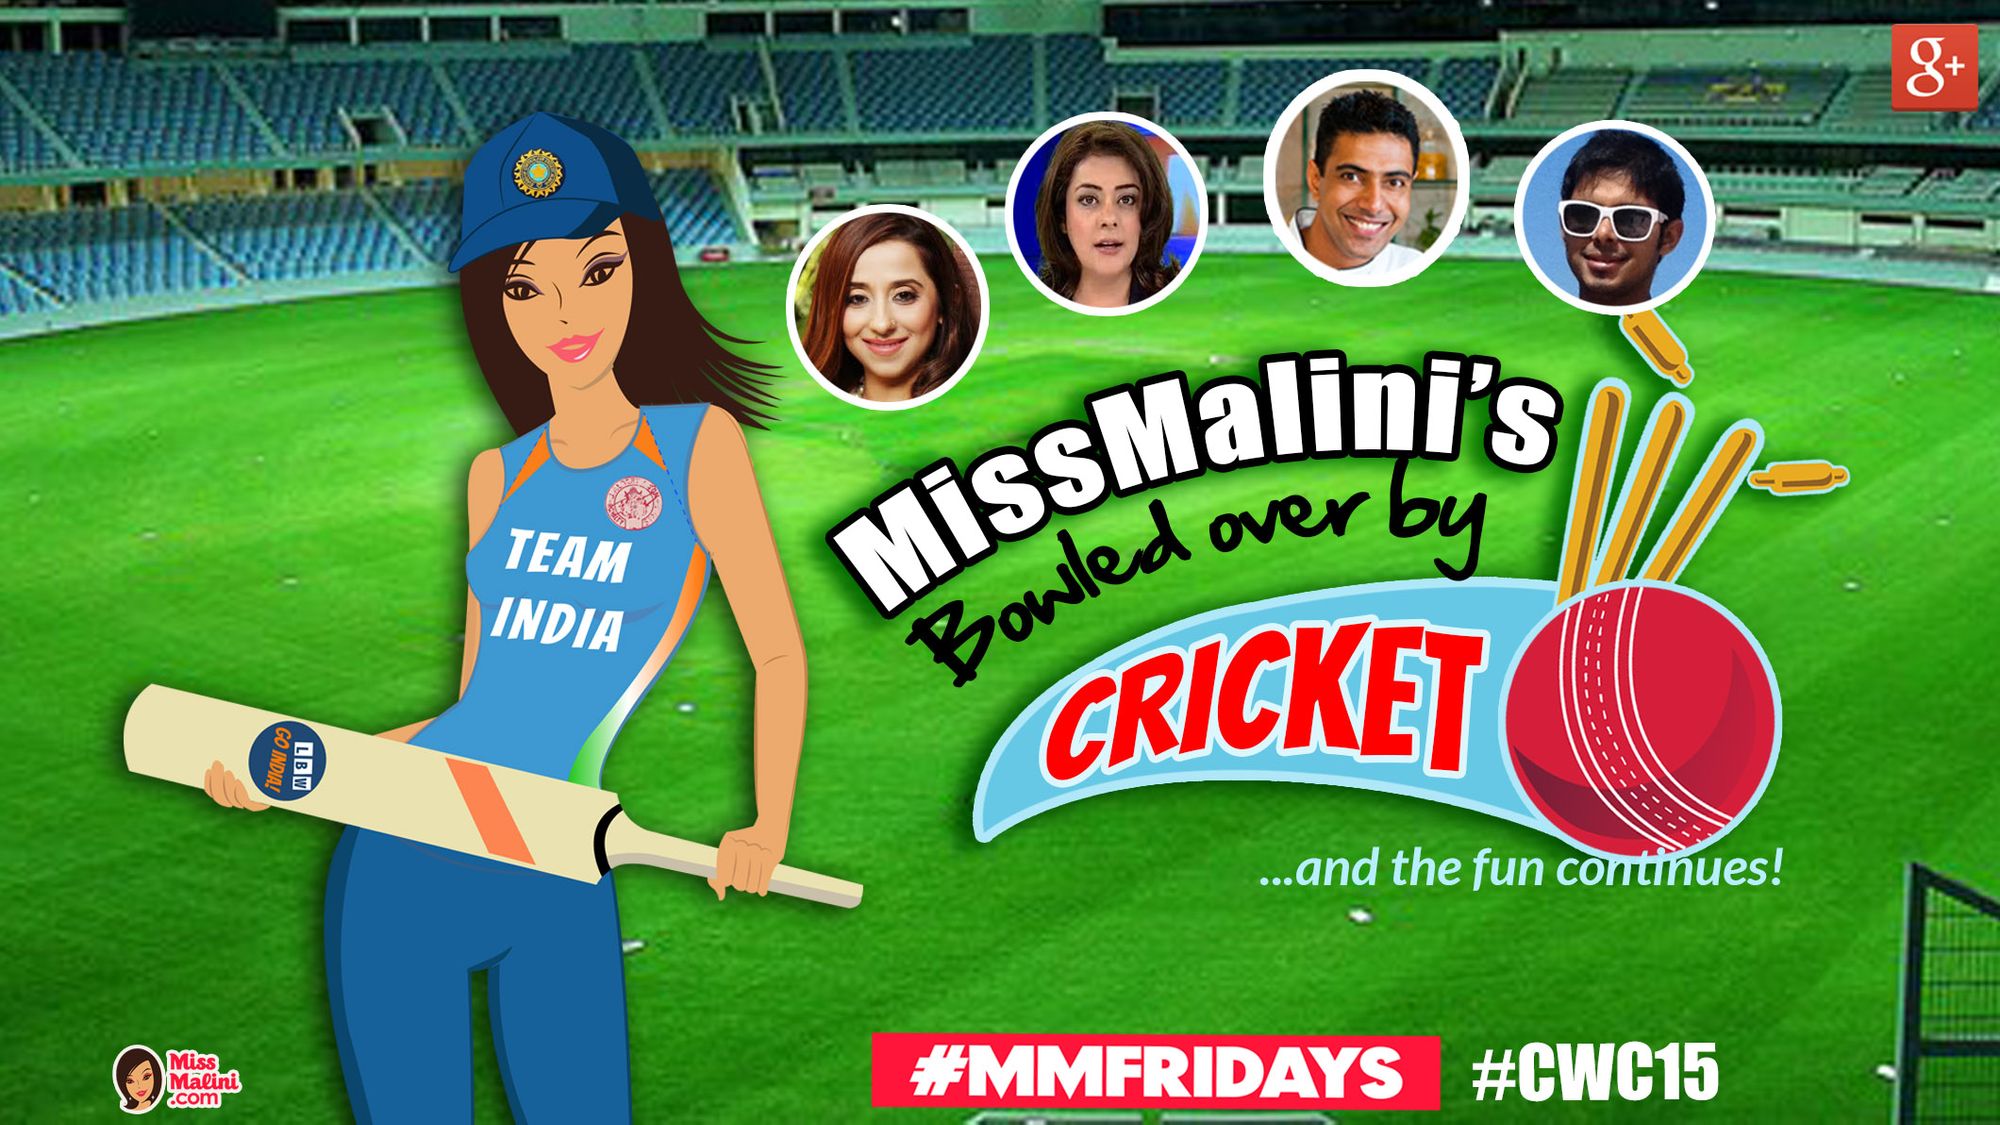 WATCH LIVE MissMalinis Bowled Over By Cricket Hangout The IPL Madness Continues!